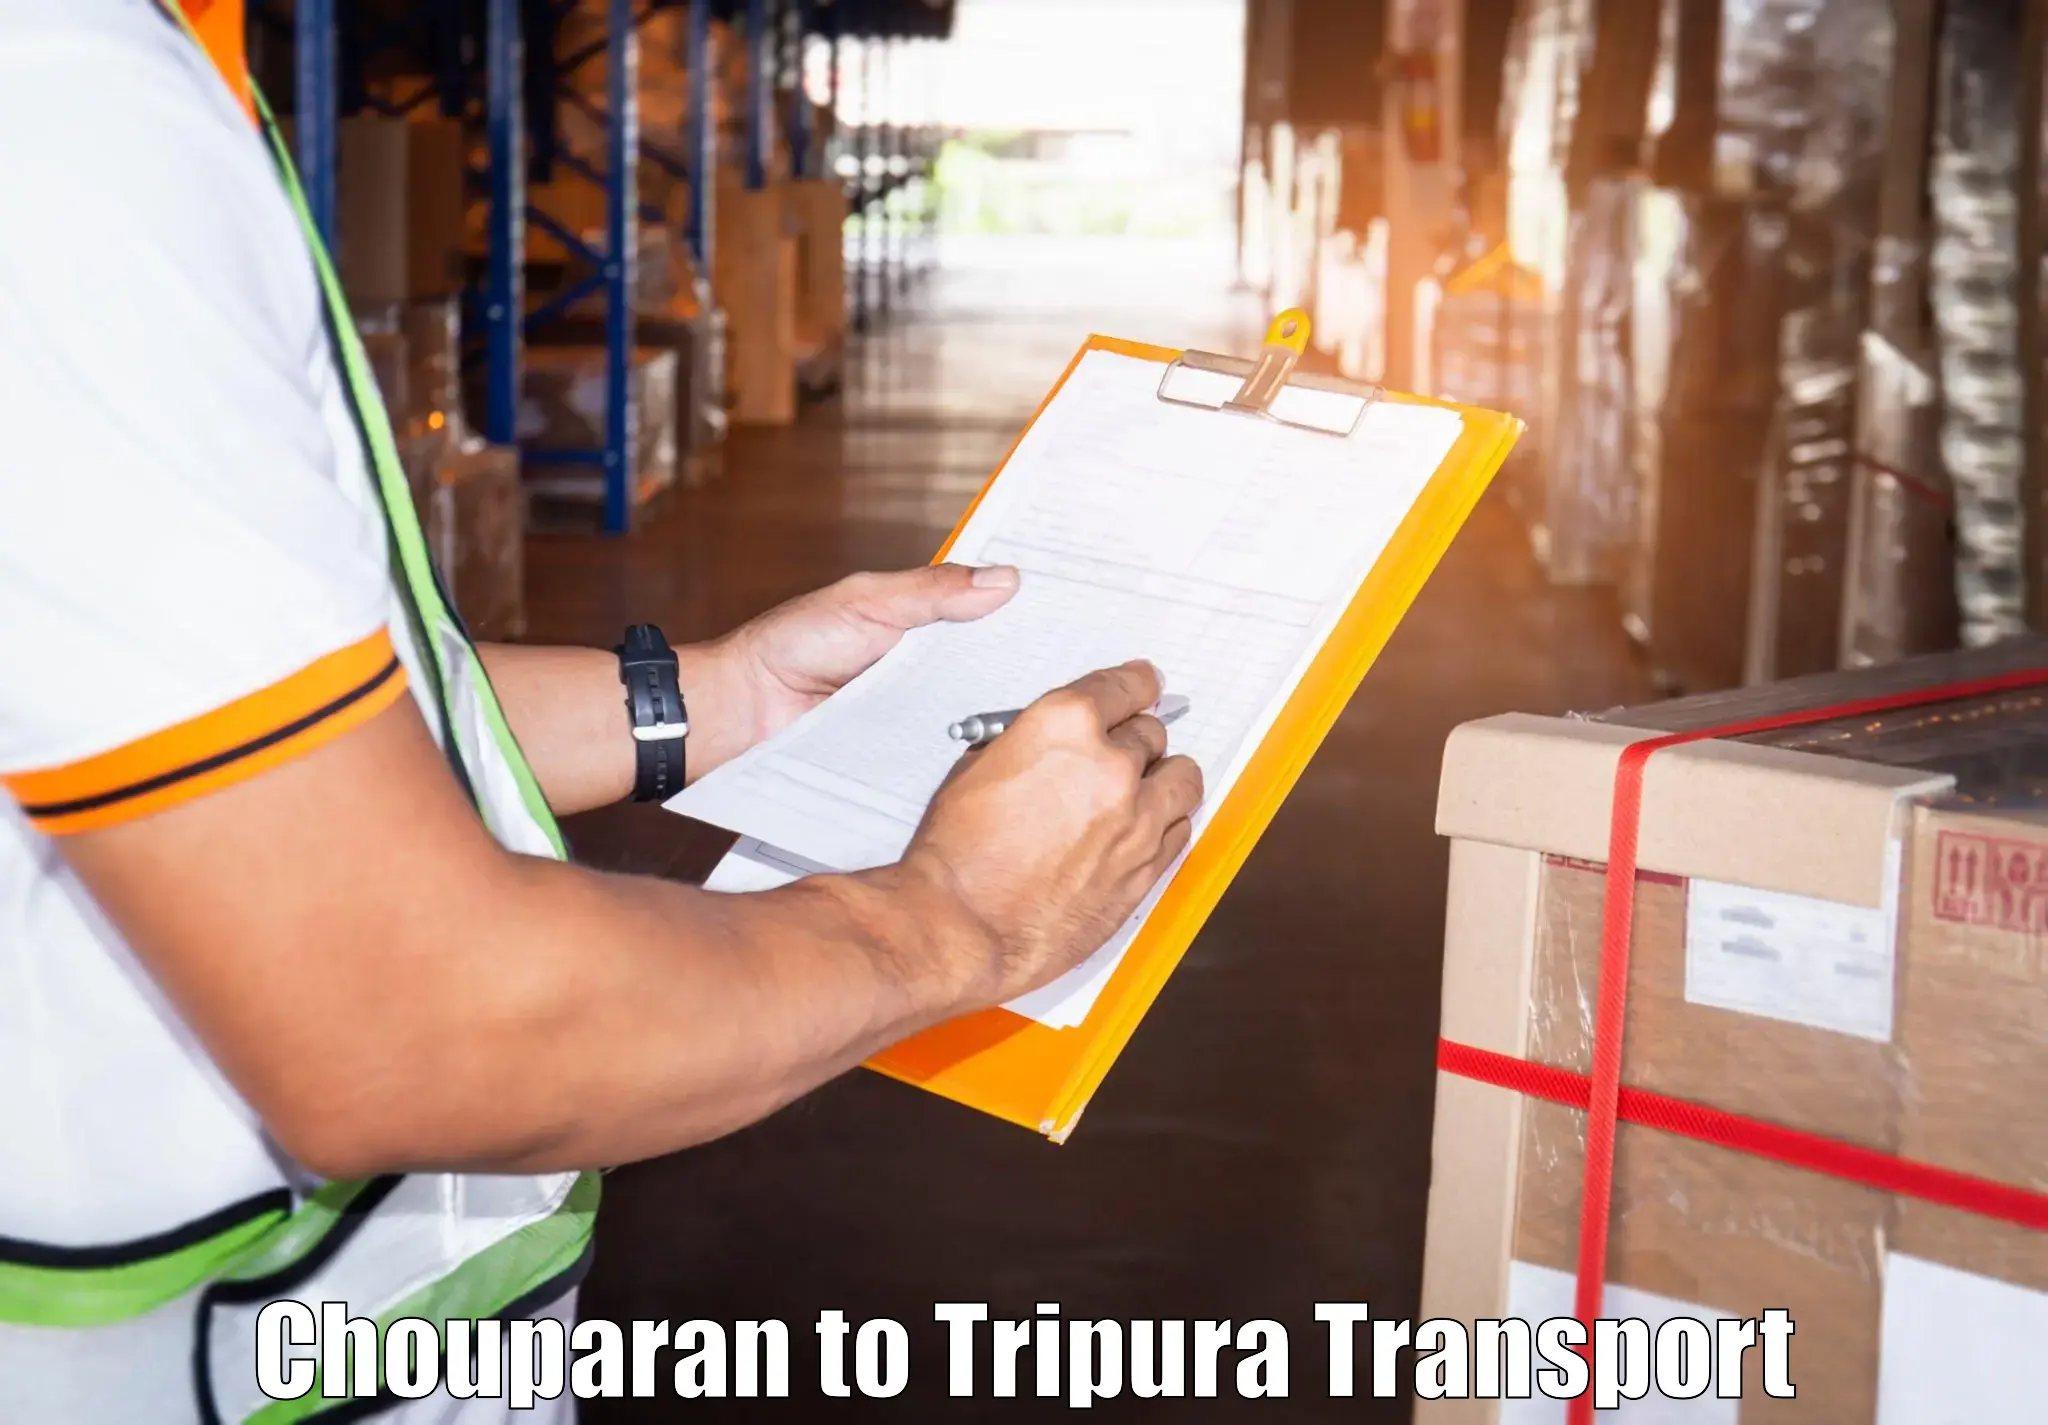 Road transport online services Chouparan to Udaipur Tripura